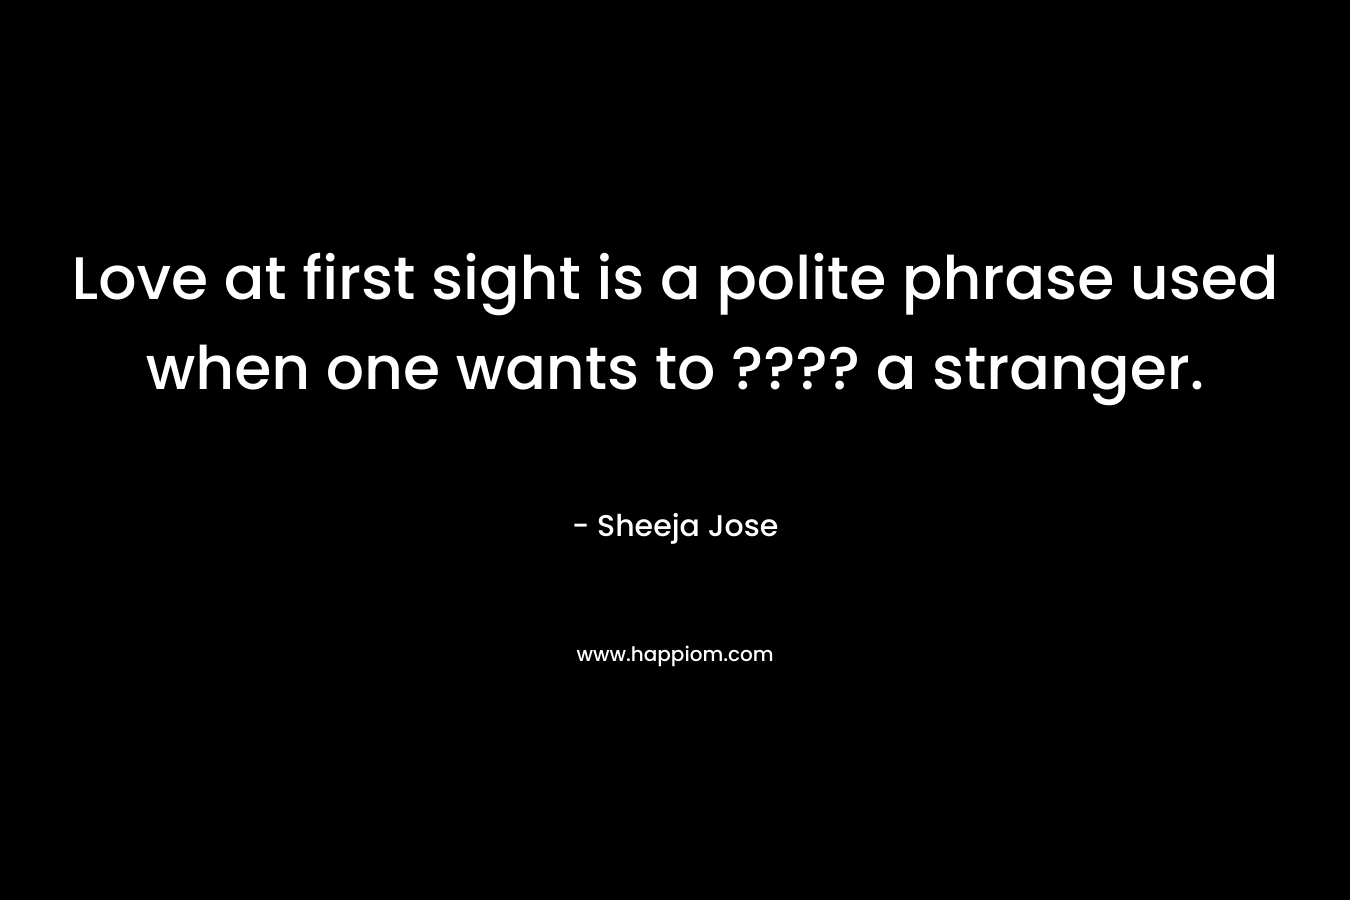 Love at first sight is a polite phrase used when one wants to ???? a stranger.